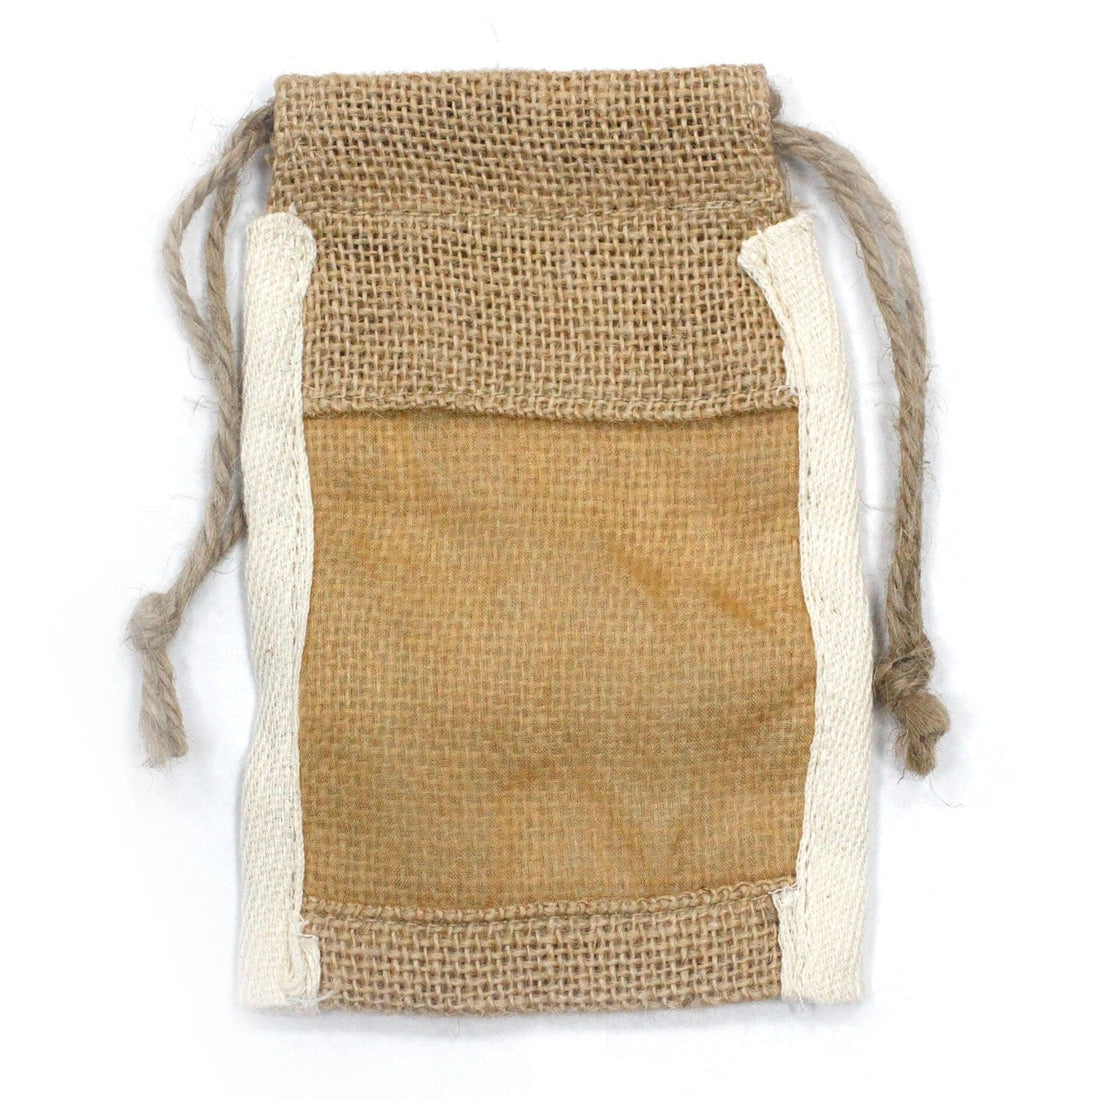 Small Washed Jute Pouch - 10x15cm - best price from Maltashopper.com NATWP-05